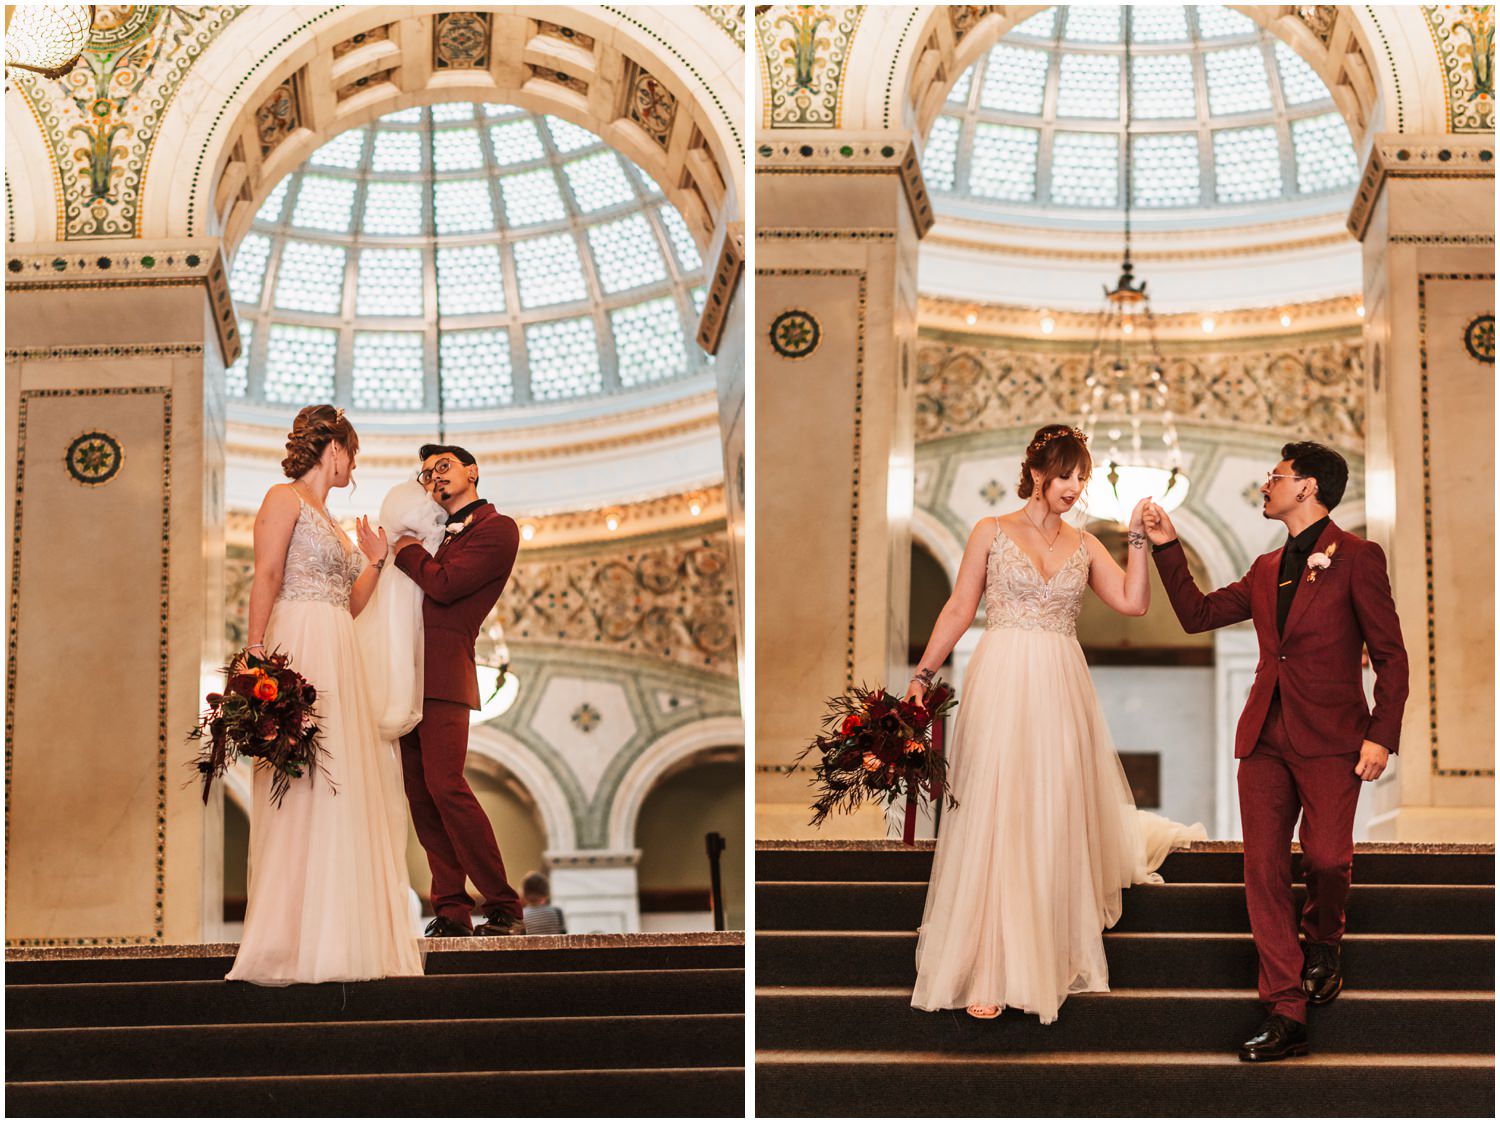 Chicago Cultural center Wedding Photography Bride and groom portraits